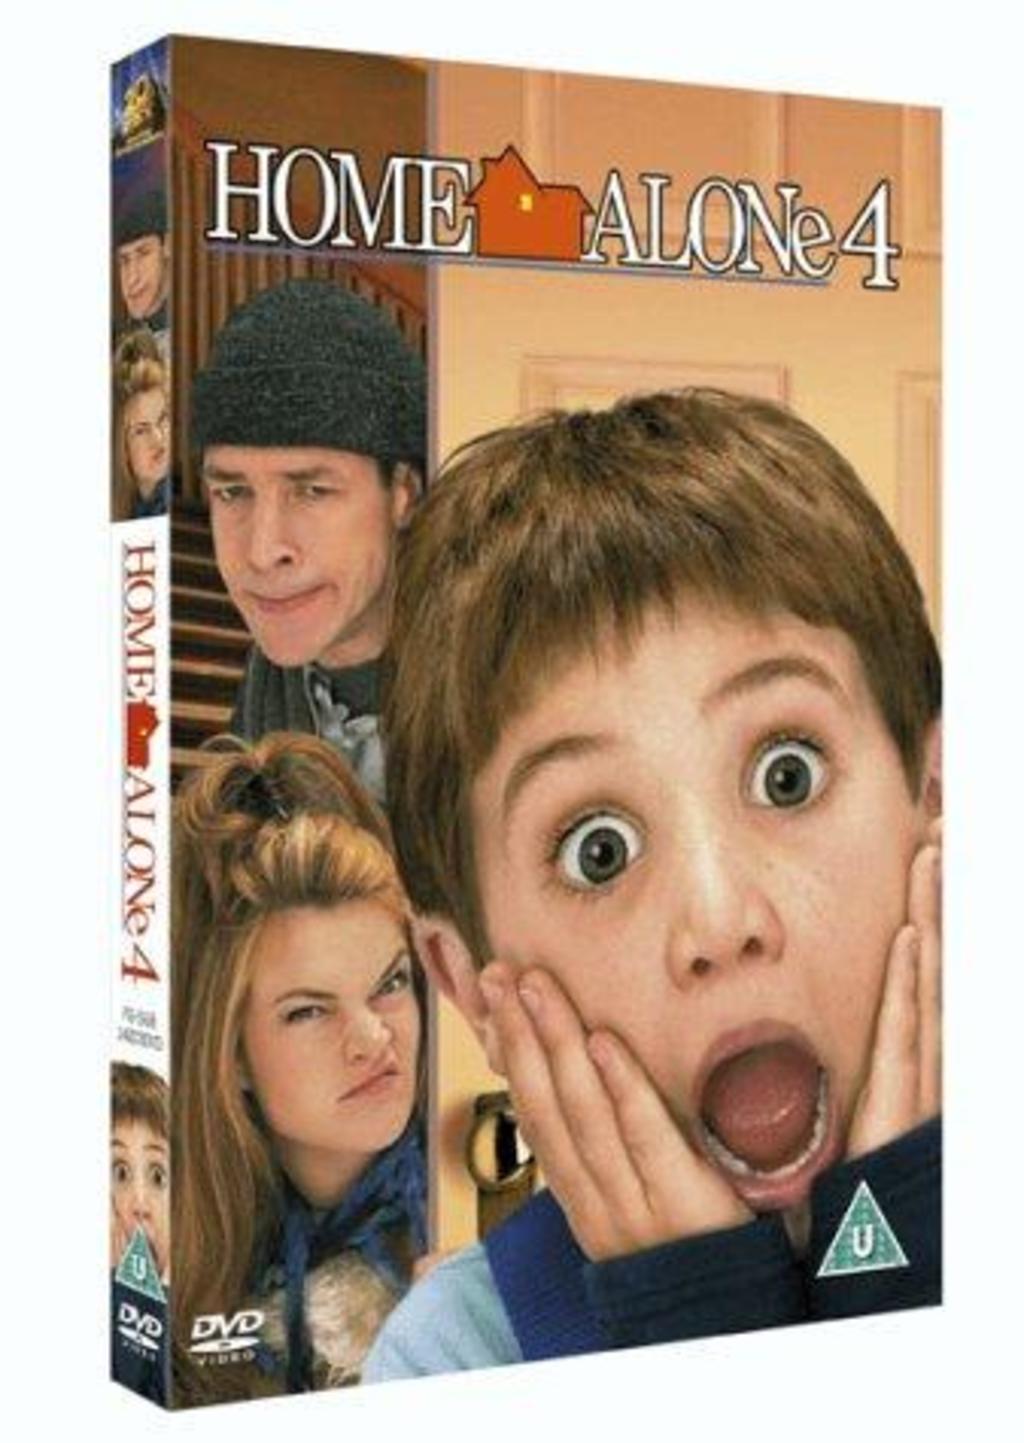 home alone 4 full movie torrent download